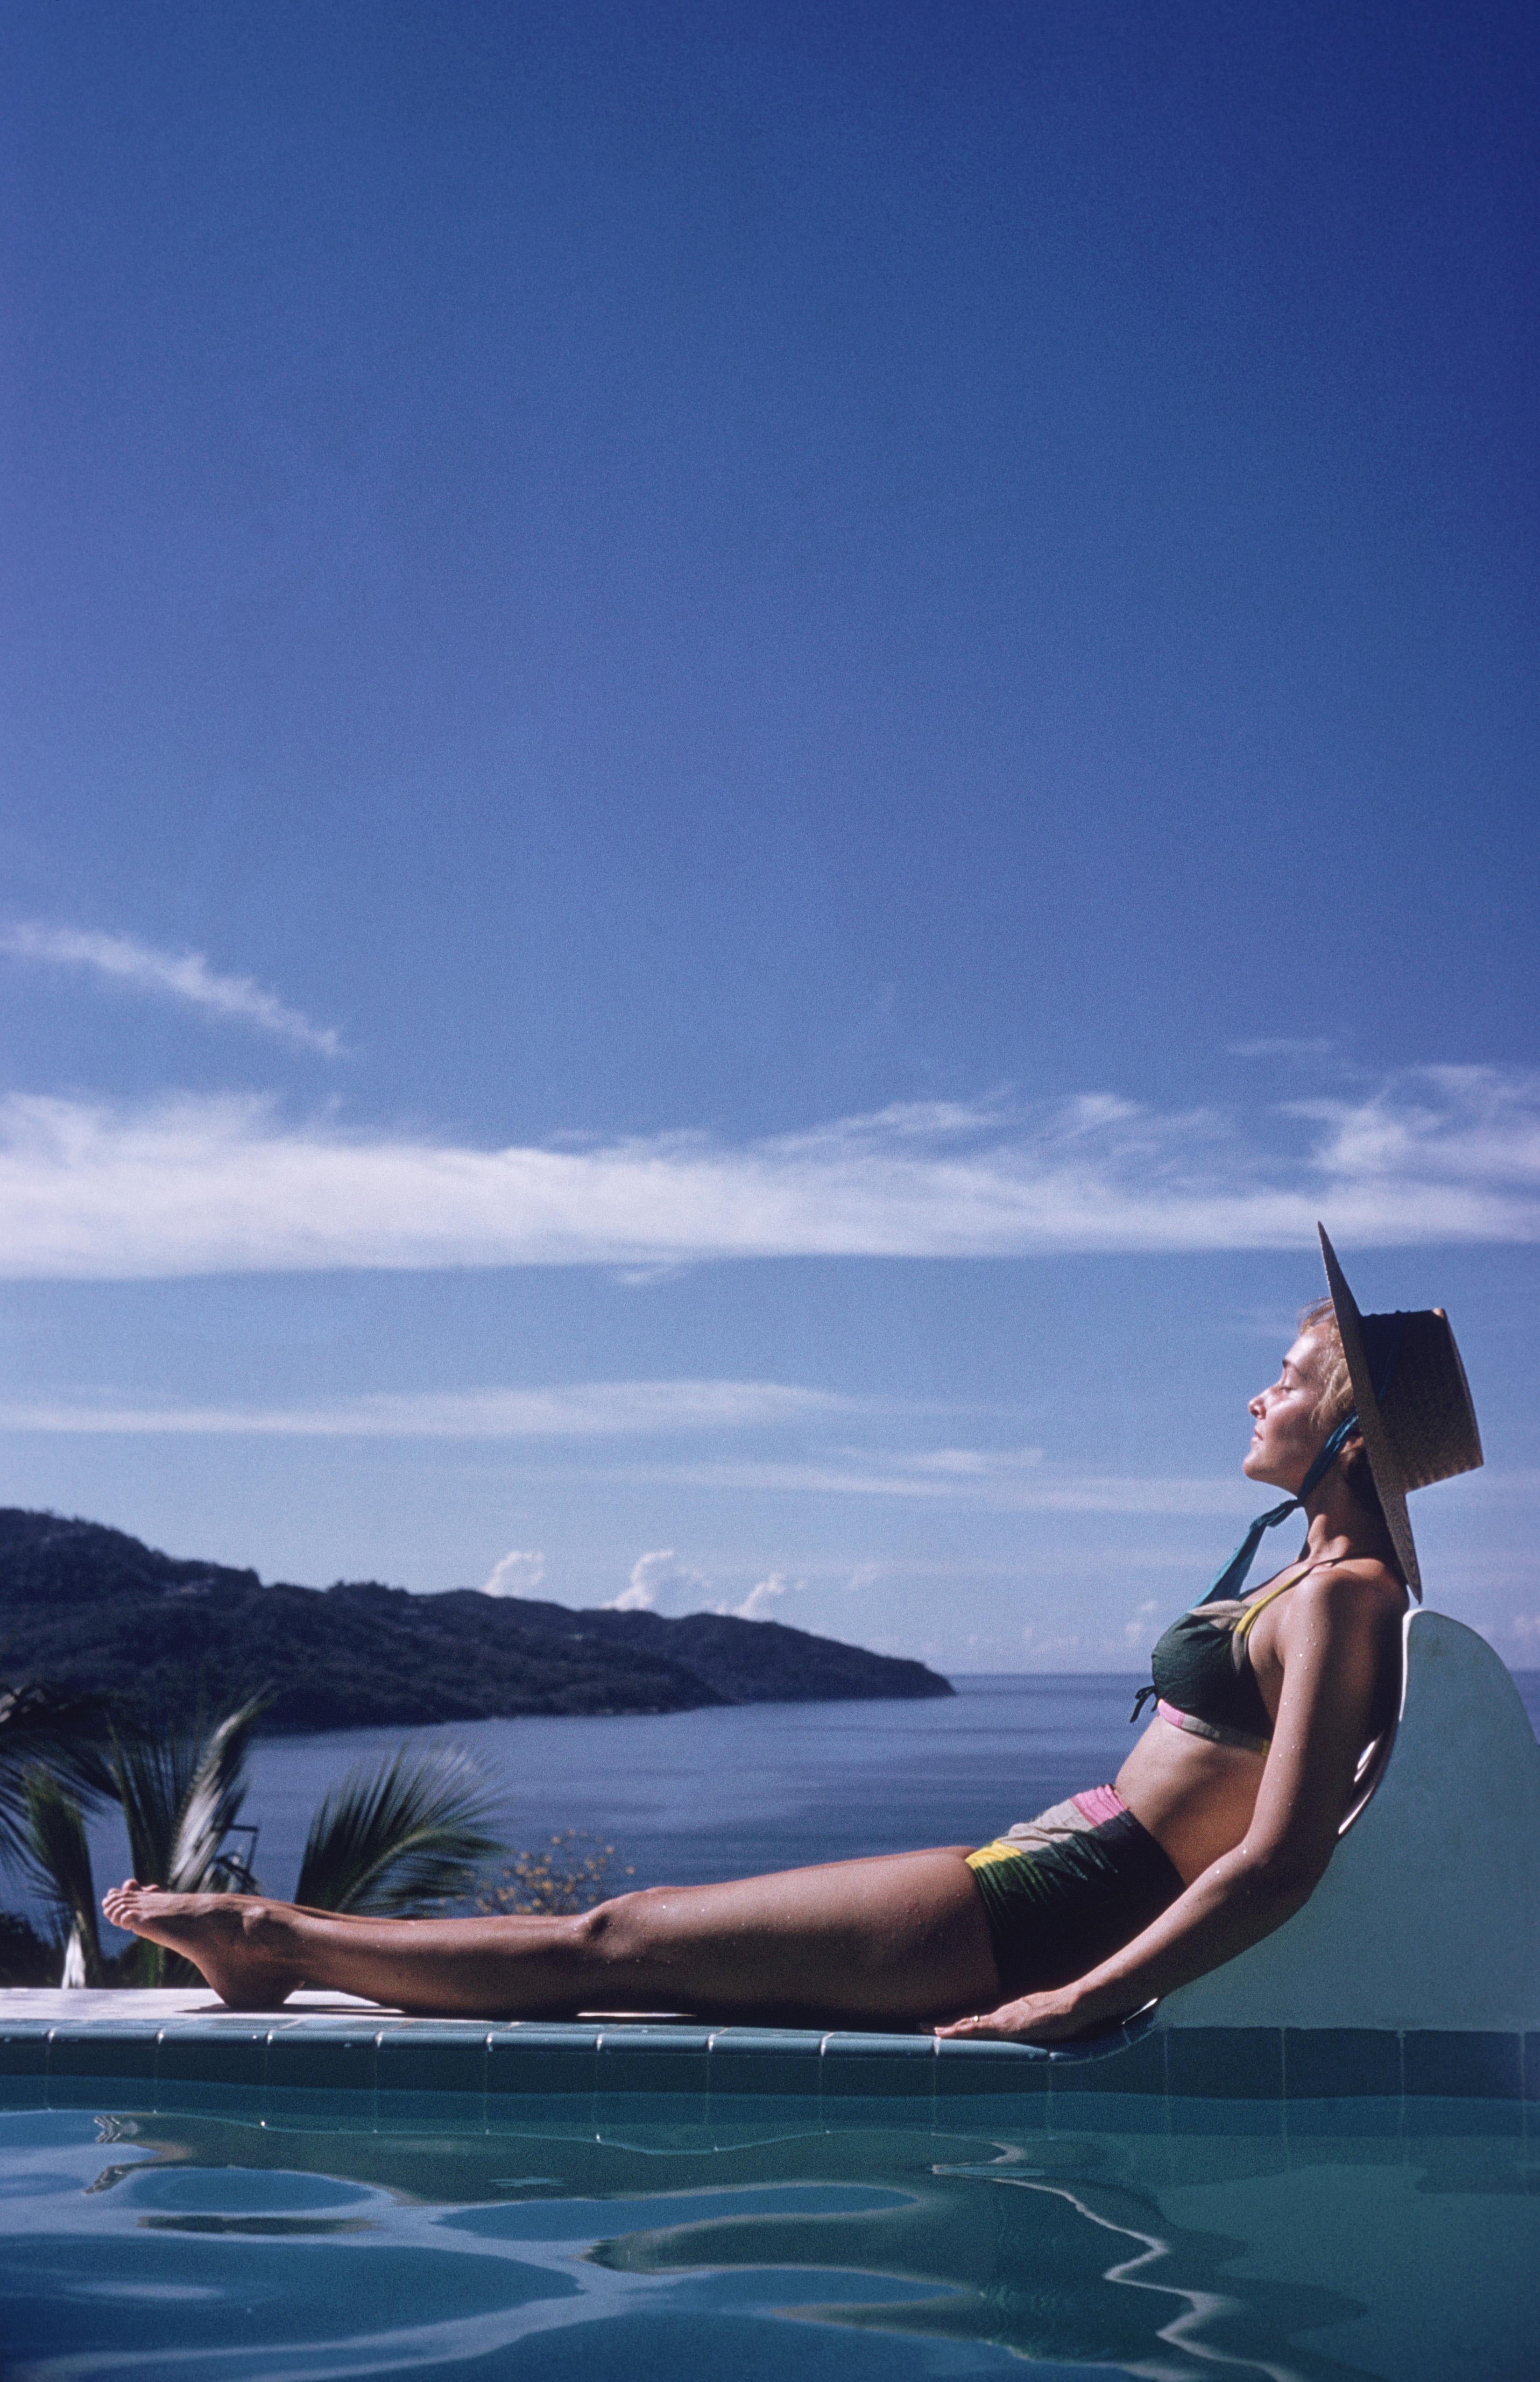 Slim Aarons Landscape Photograph - Between the Sea and Sky, Estate Edition